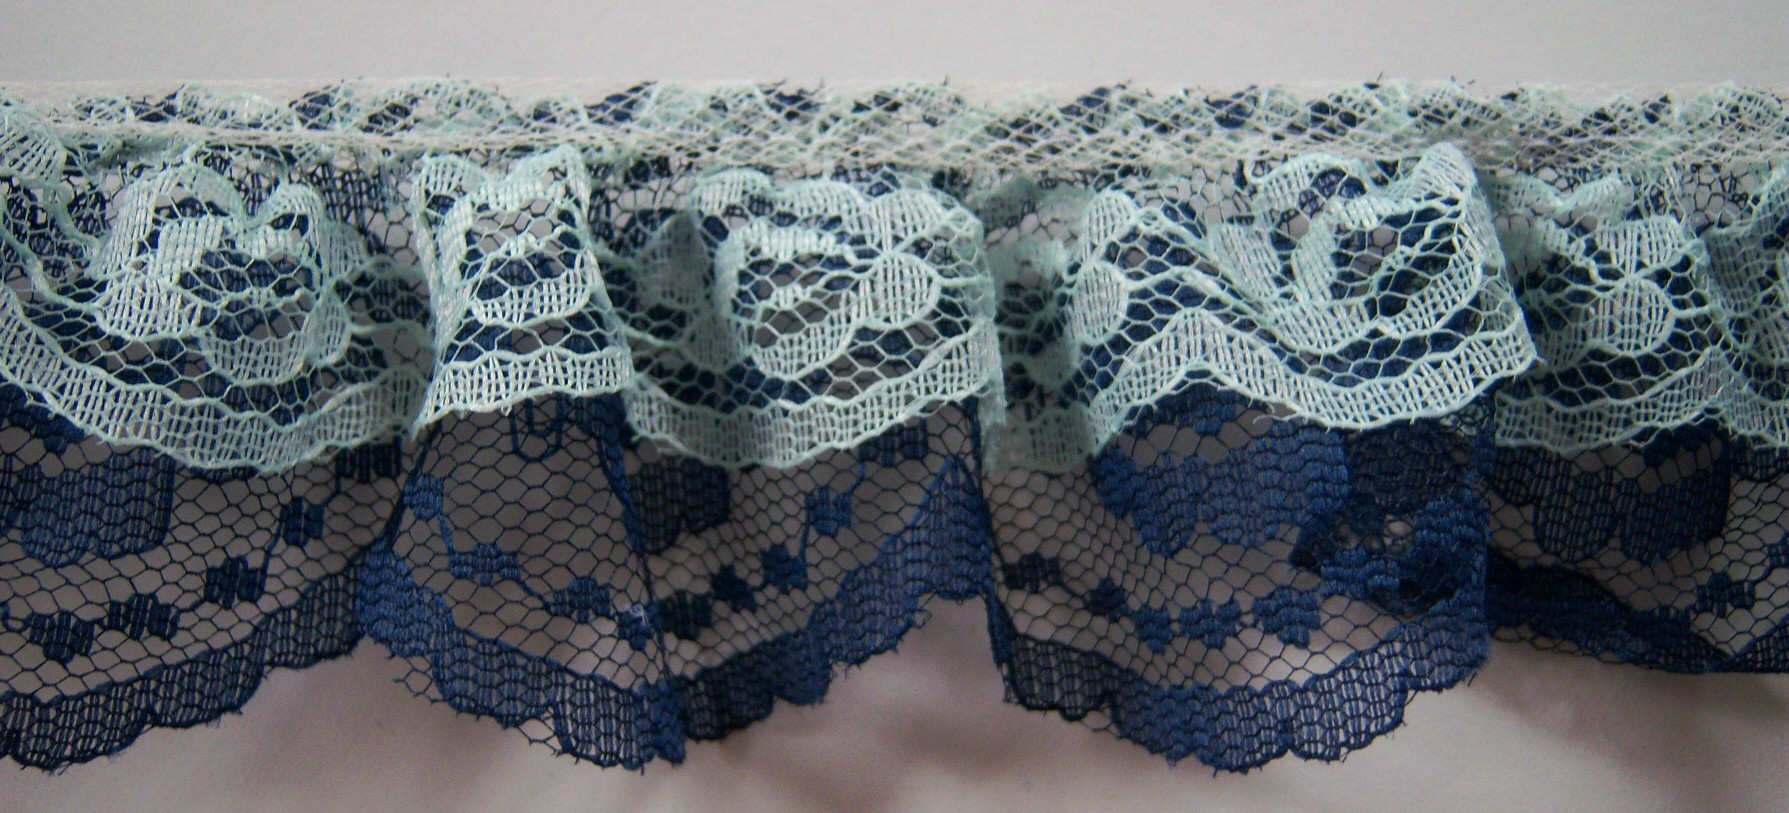 Lt. Mint/Navy 2" Double Gathered Lace